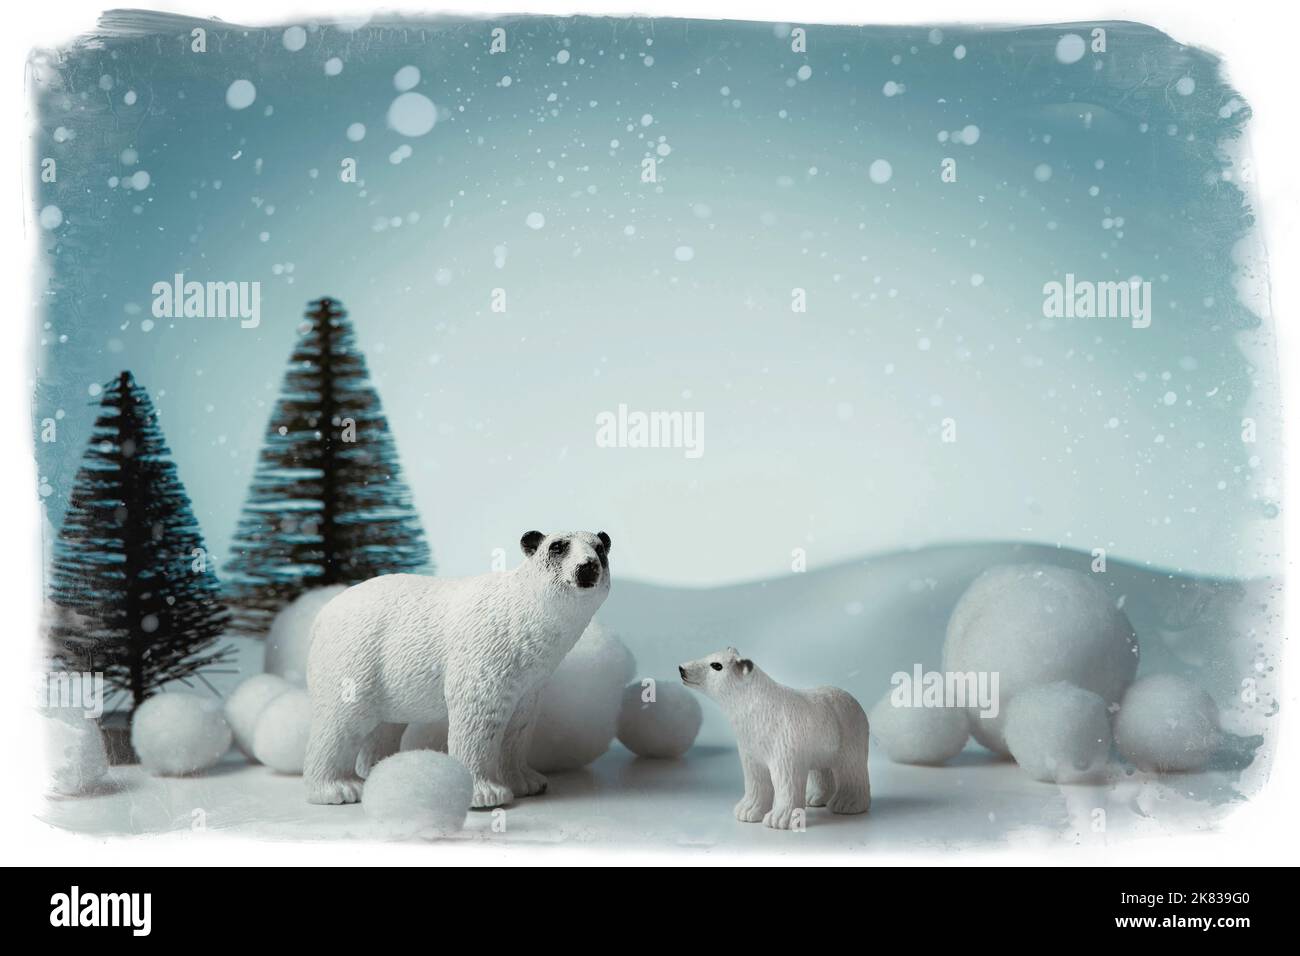 Vintage winter background for invitations and cards with bears in a snowy forest with fir trees. Concept for Christmas and New Year Stock Photo